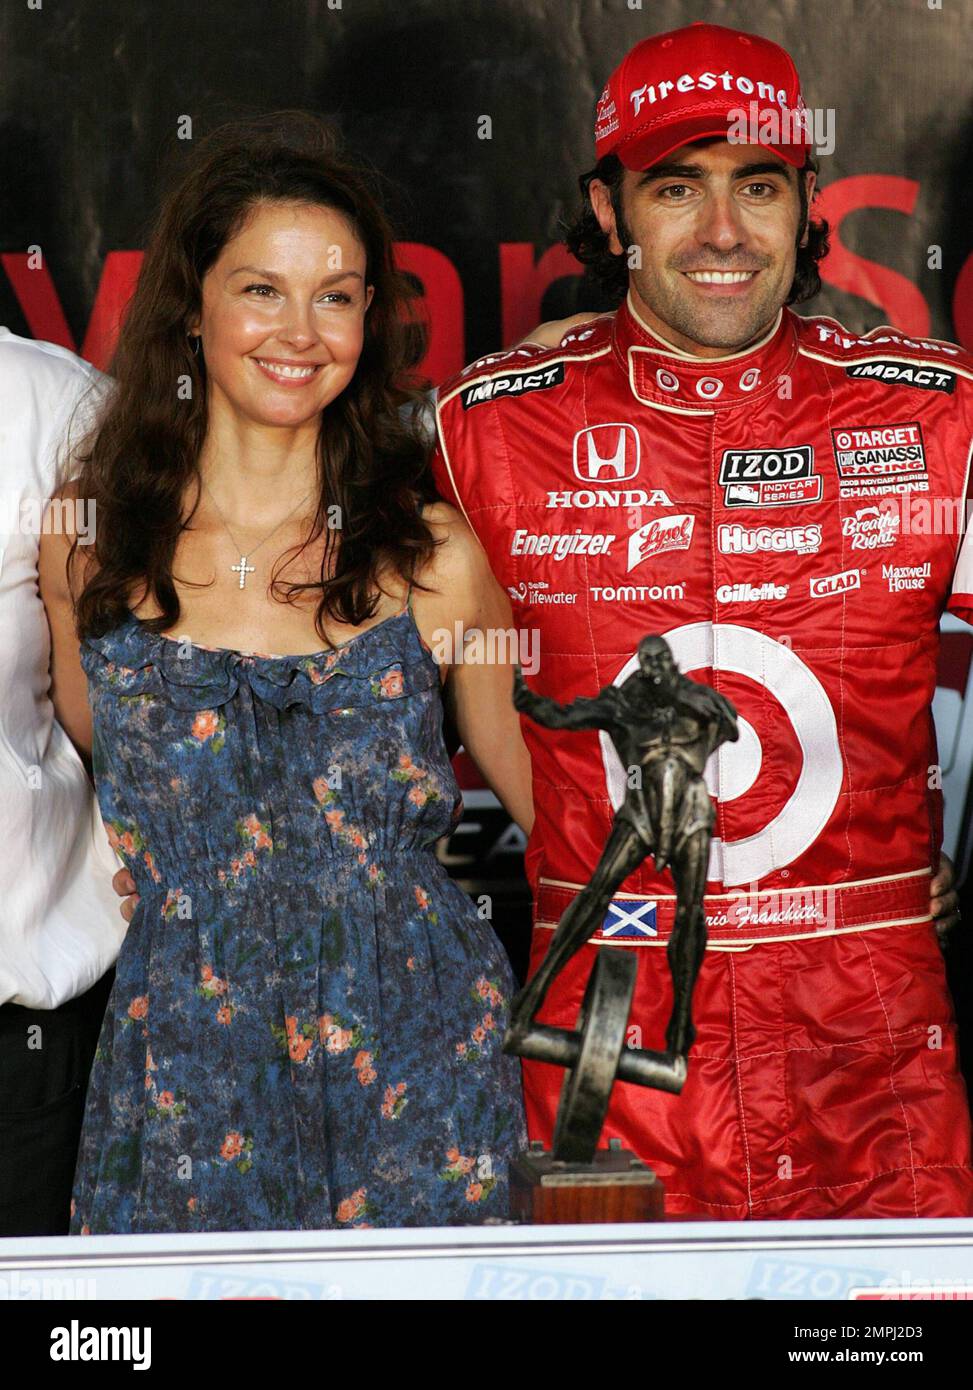 Indy Racing League driver Dario Franchitti and extremely happy looking wife  actress Ashley Judd celebrate his IZOD IndyCar Series Title Championship  after the Cafe do Brasil Indy 300 held at the Homestead 